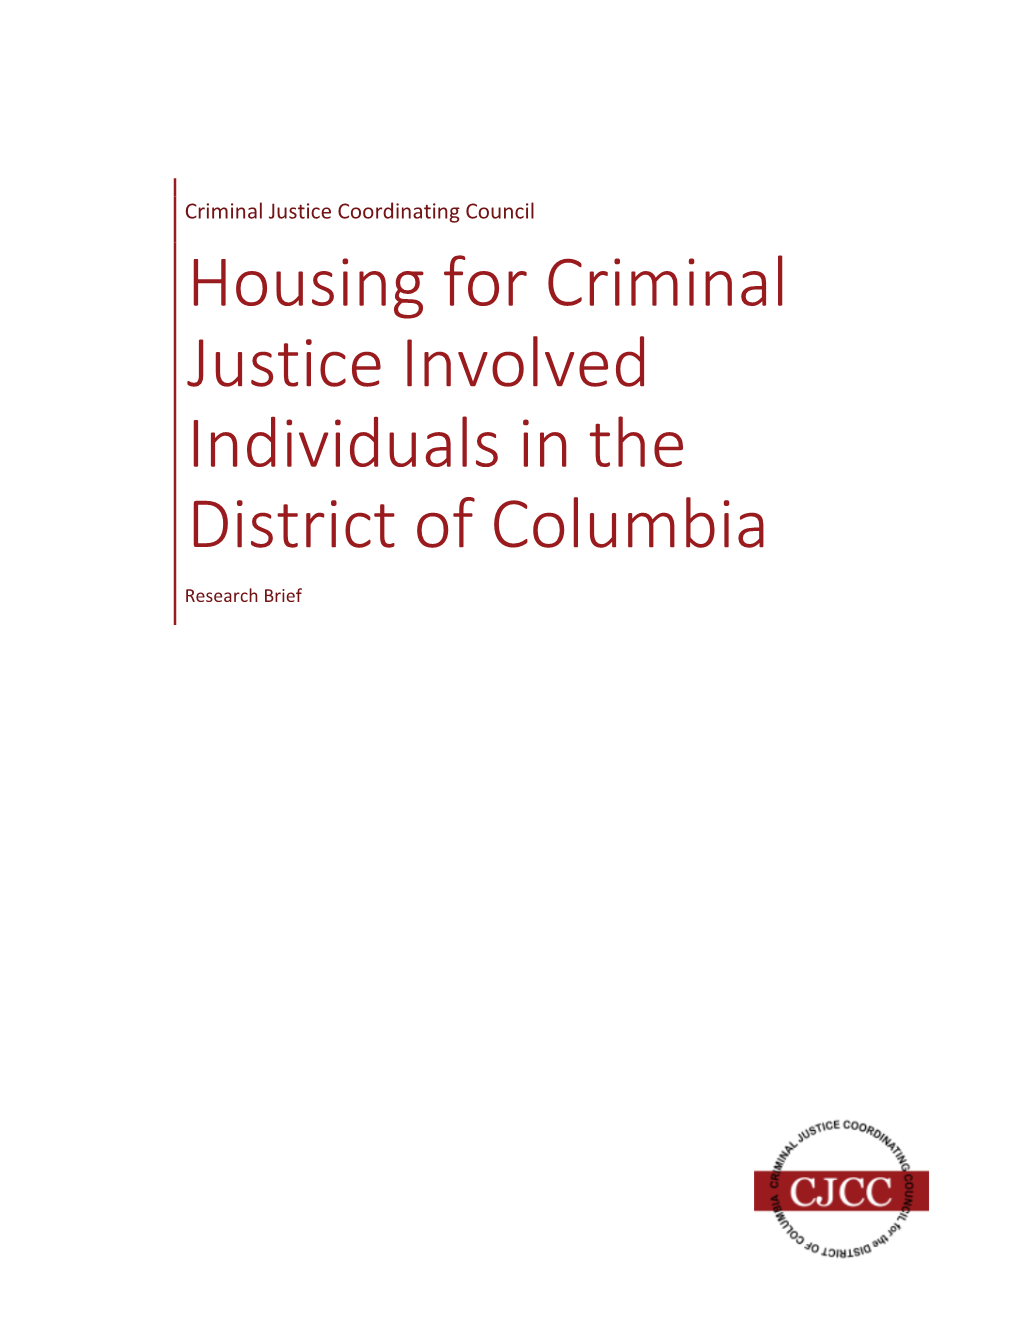 Housing for Criminal Justice Involved Individuals in the District of Columbia